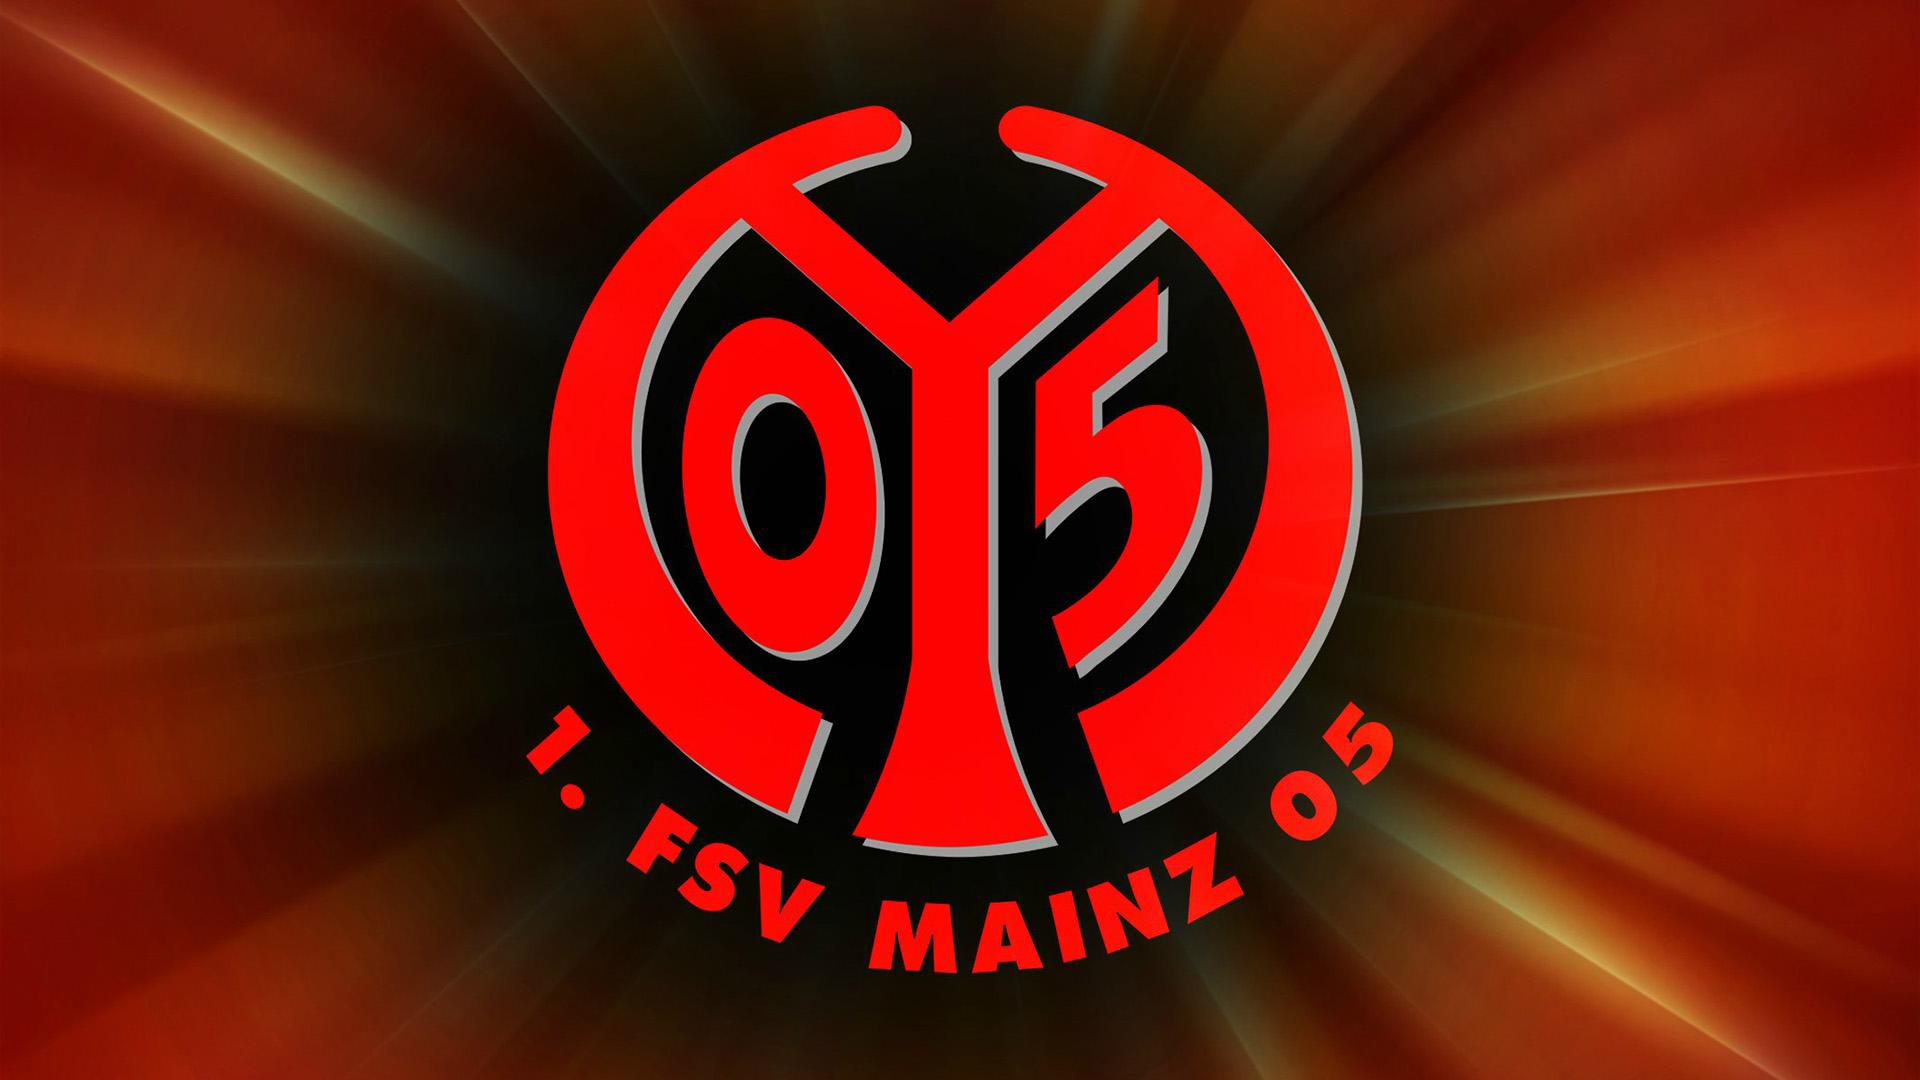 Mainz 05 Wallpaper Fsv Mainz 05 Wallpapers Wallpaper Cave Only Images 